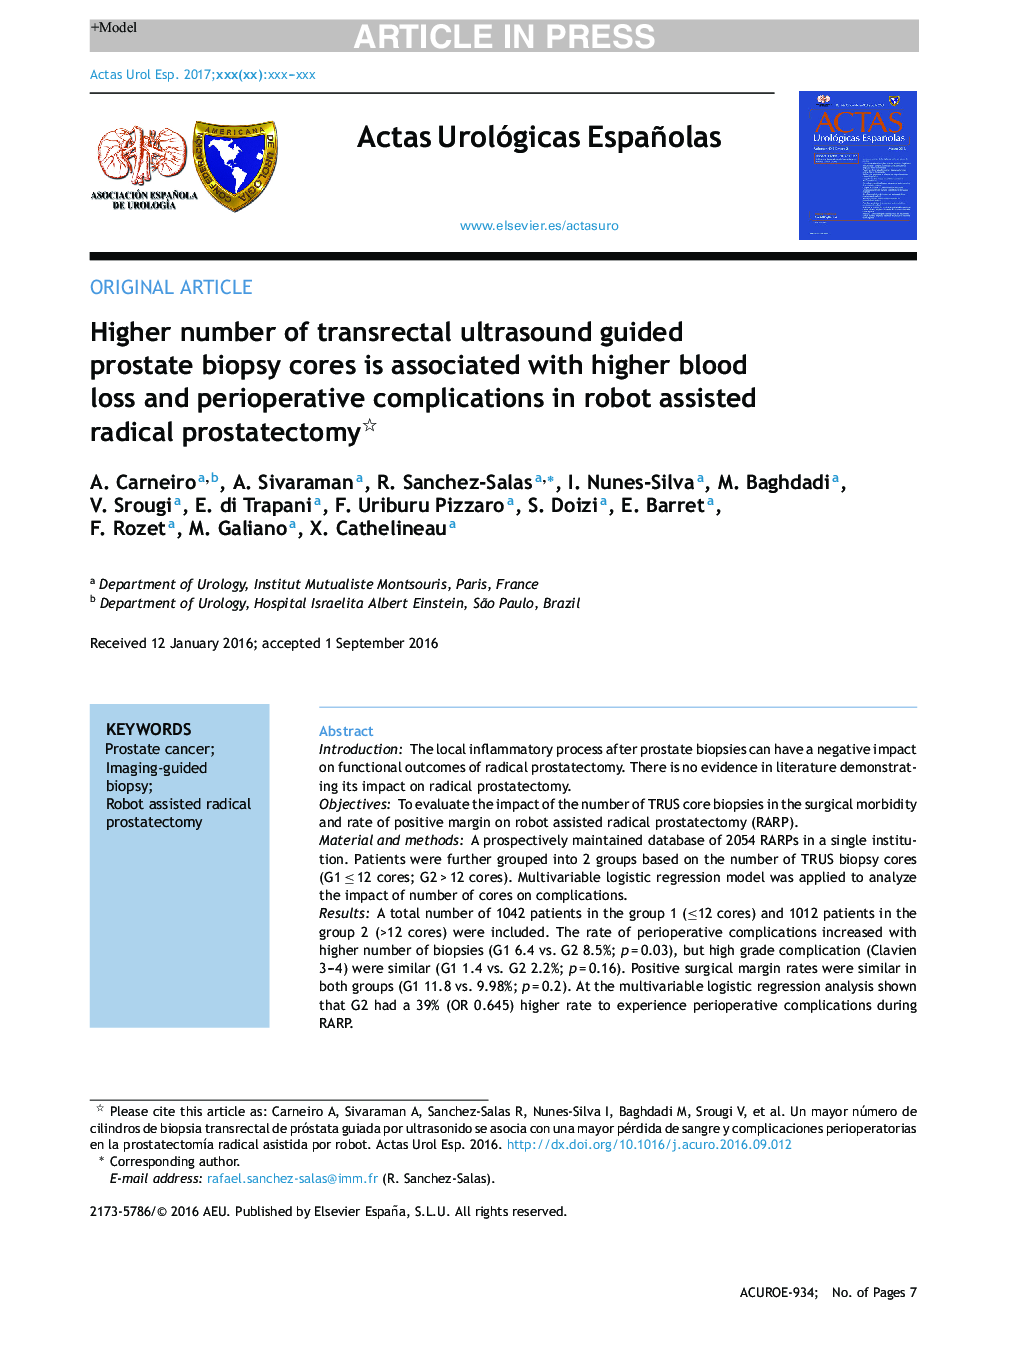 Higher number of transrectal ultrasound guided prostate biopsy cores is associated with higher blood loss and perioperative complications in robot assisted radical prostatectomy